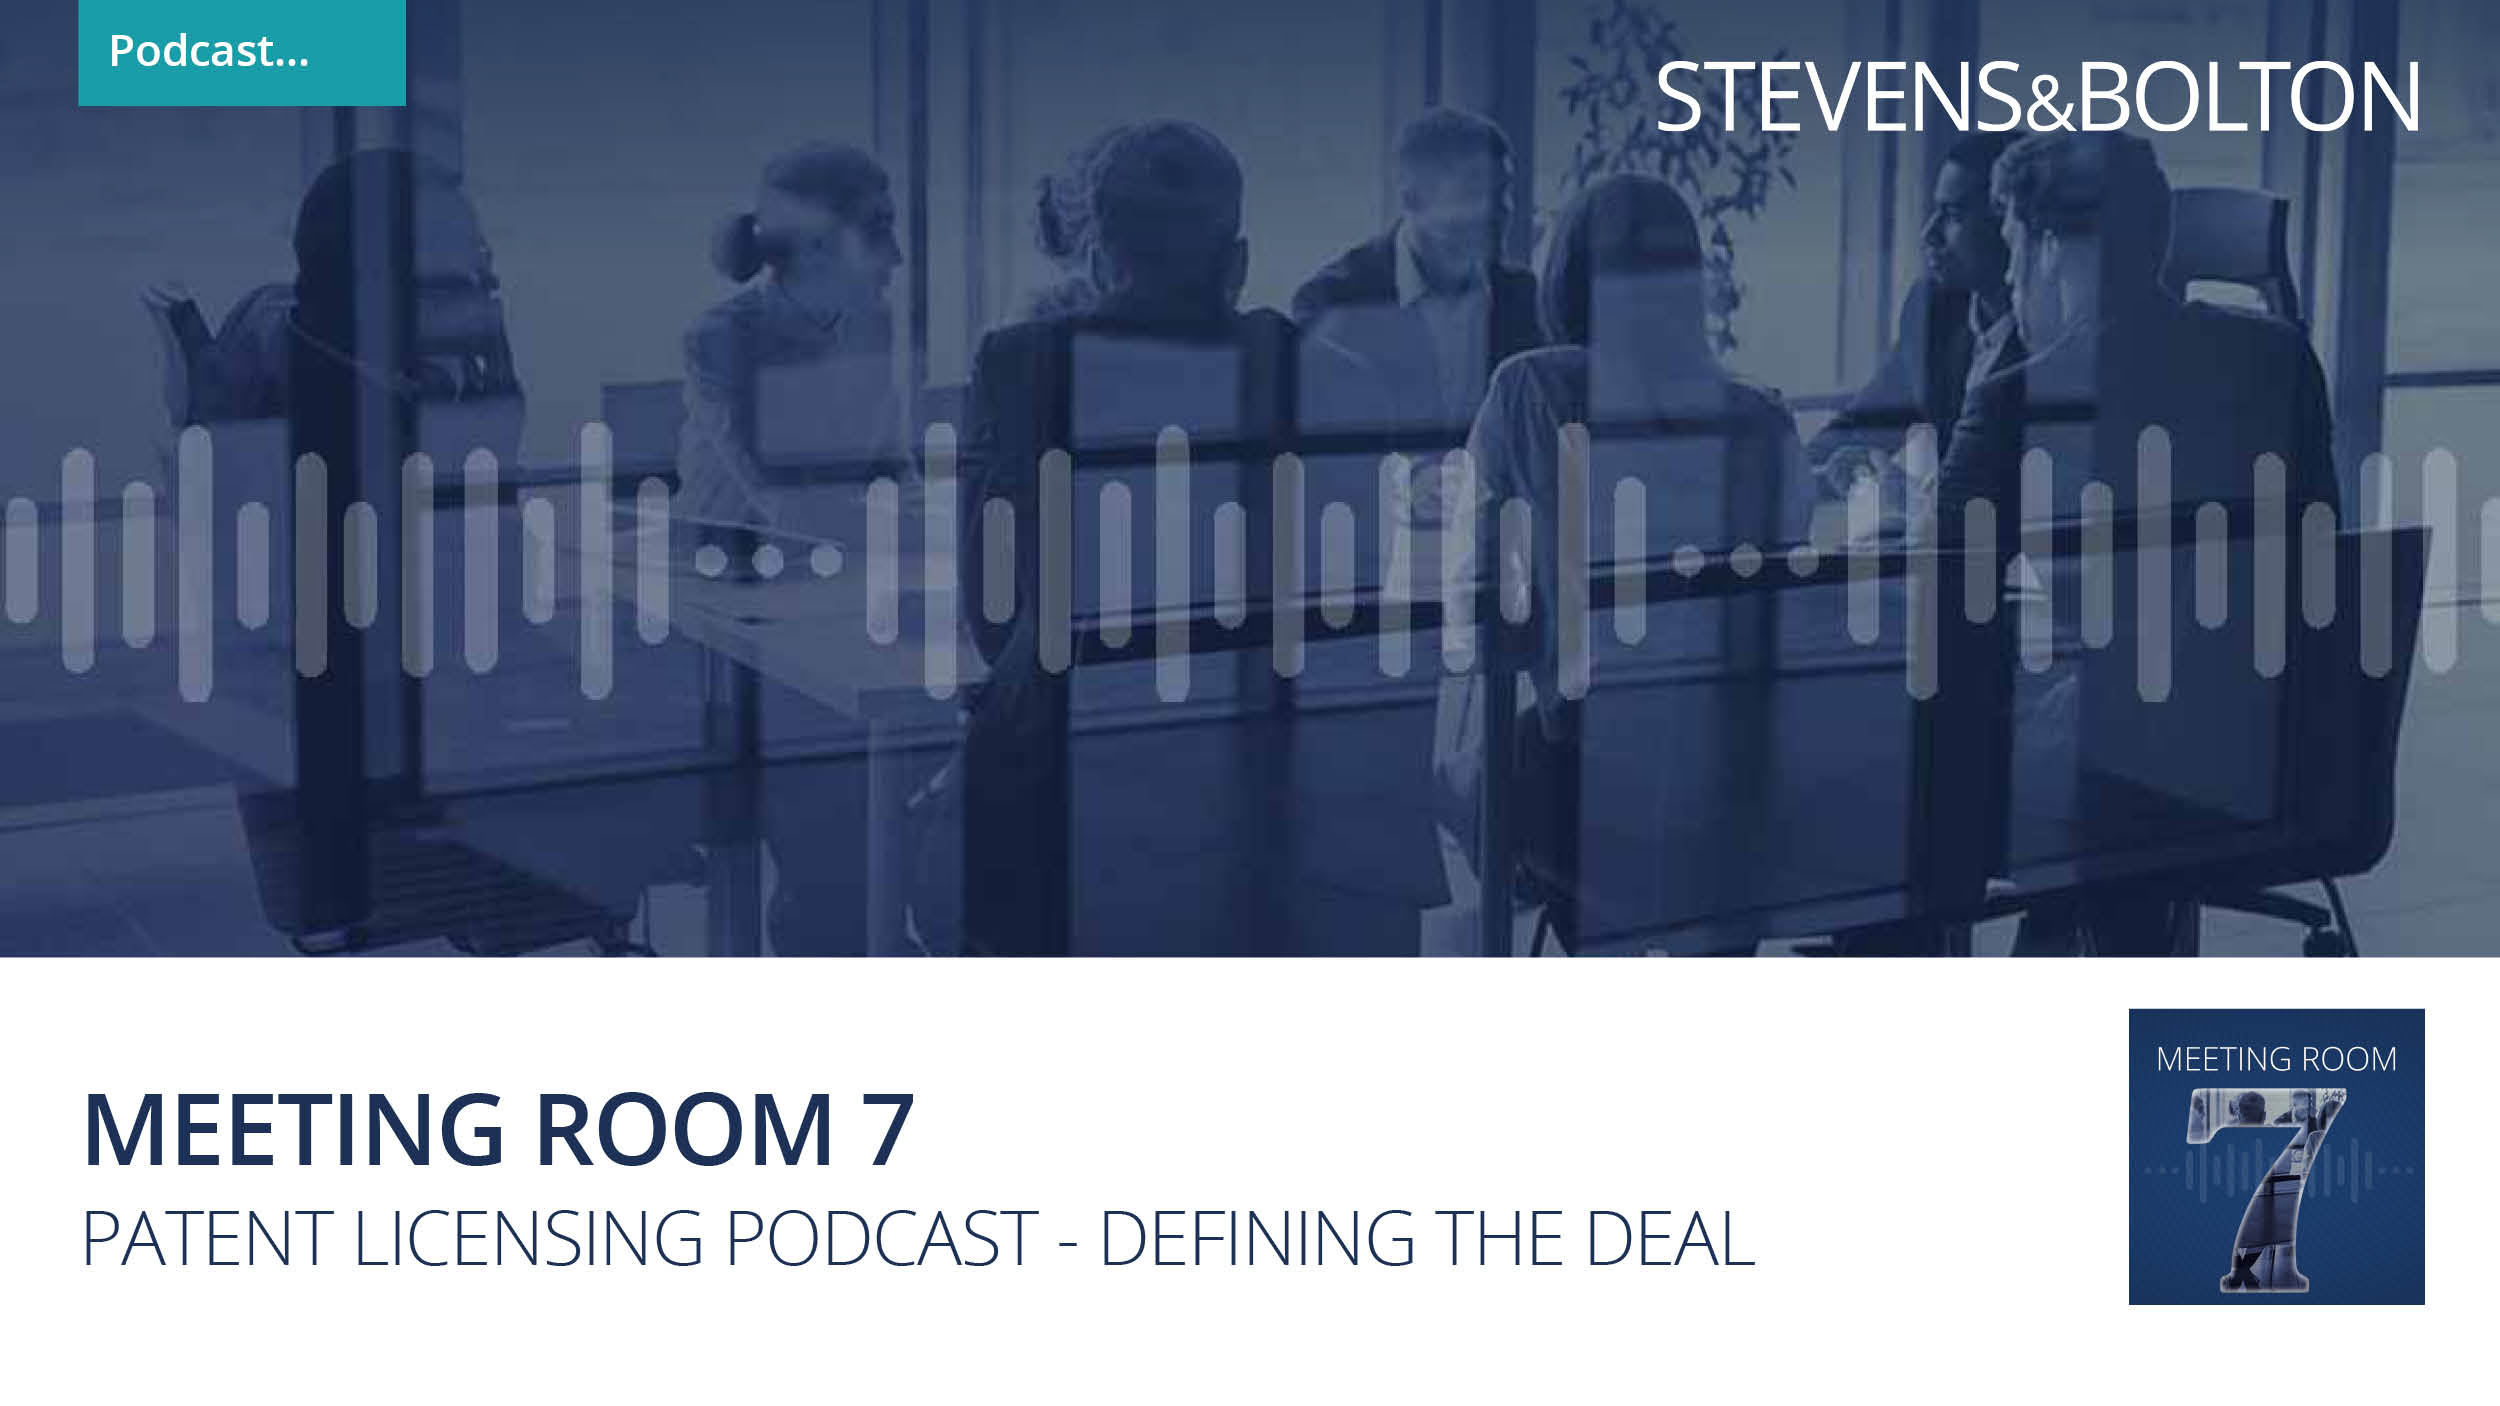 Meeting Room 7 - The patent licensing podcast - Defining the deal